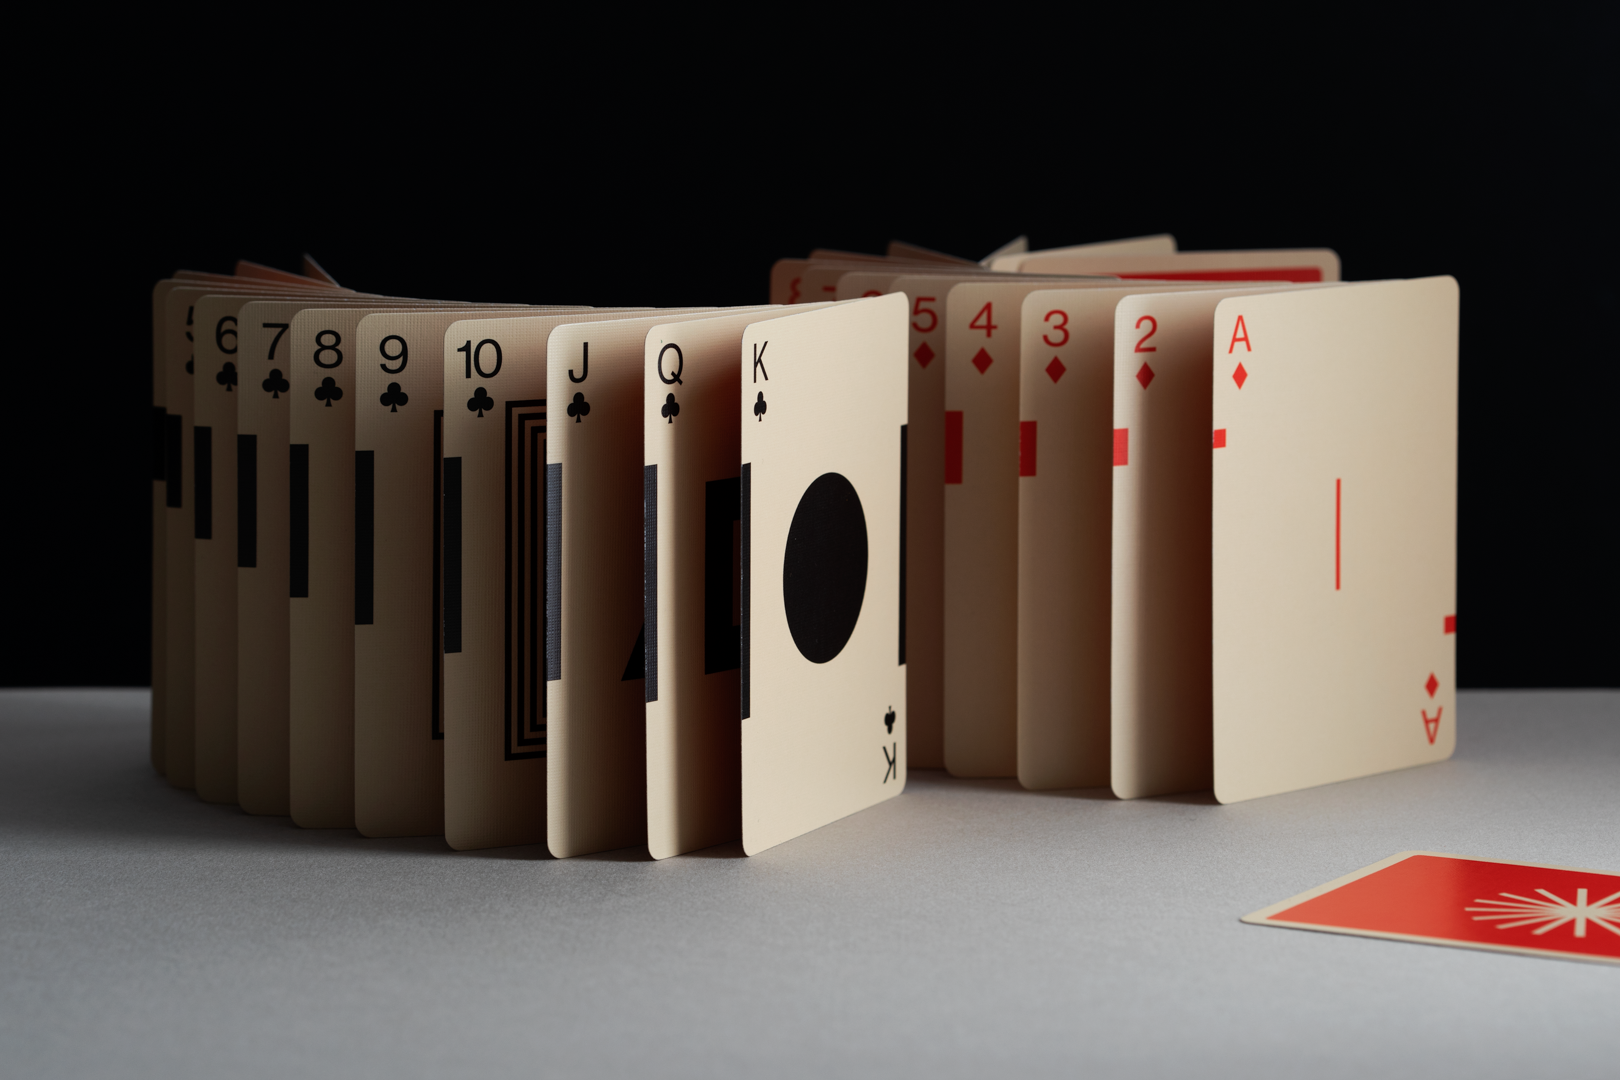 Eames x Art of Play: Red and Blue Playing Cards